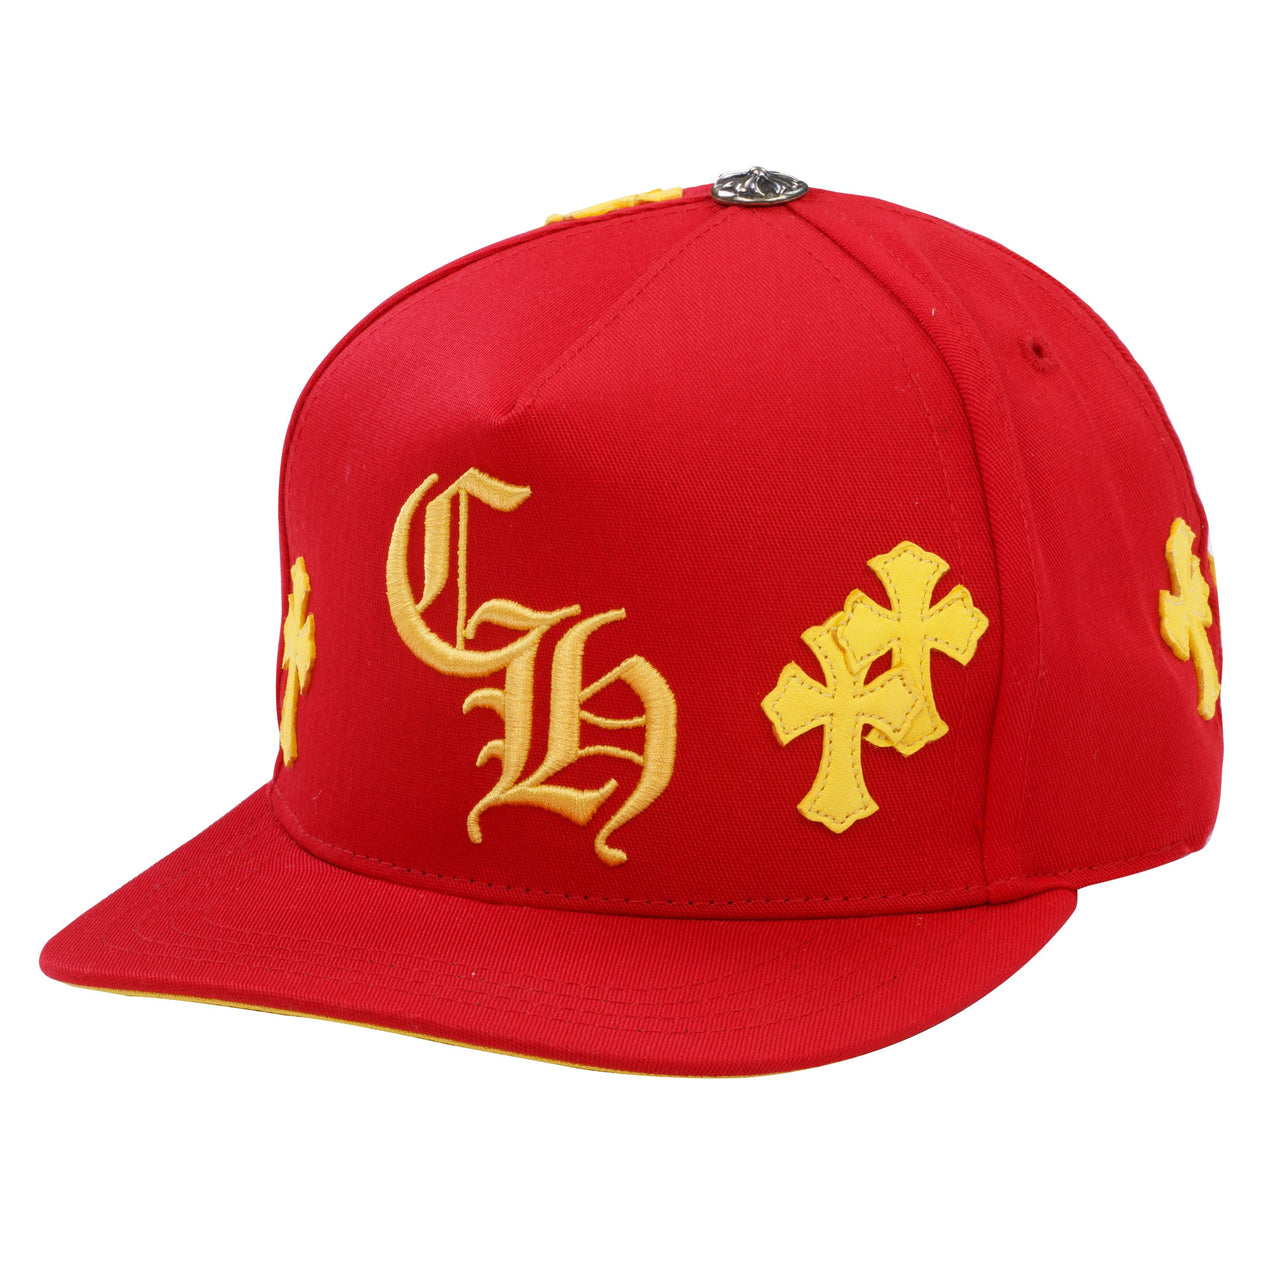 Chrome Hearts Patch Snapback Red Gold